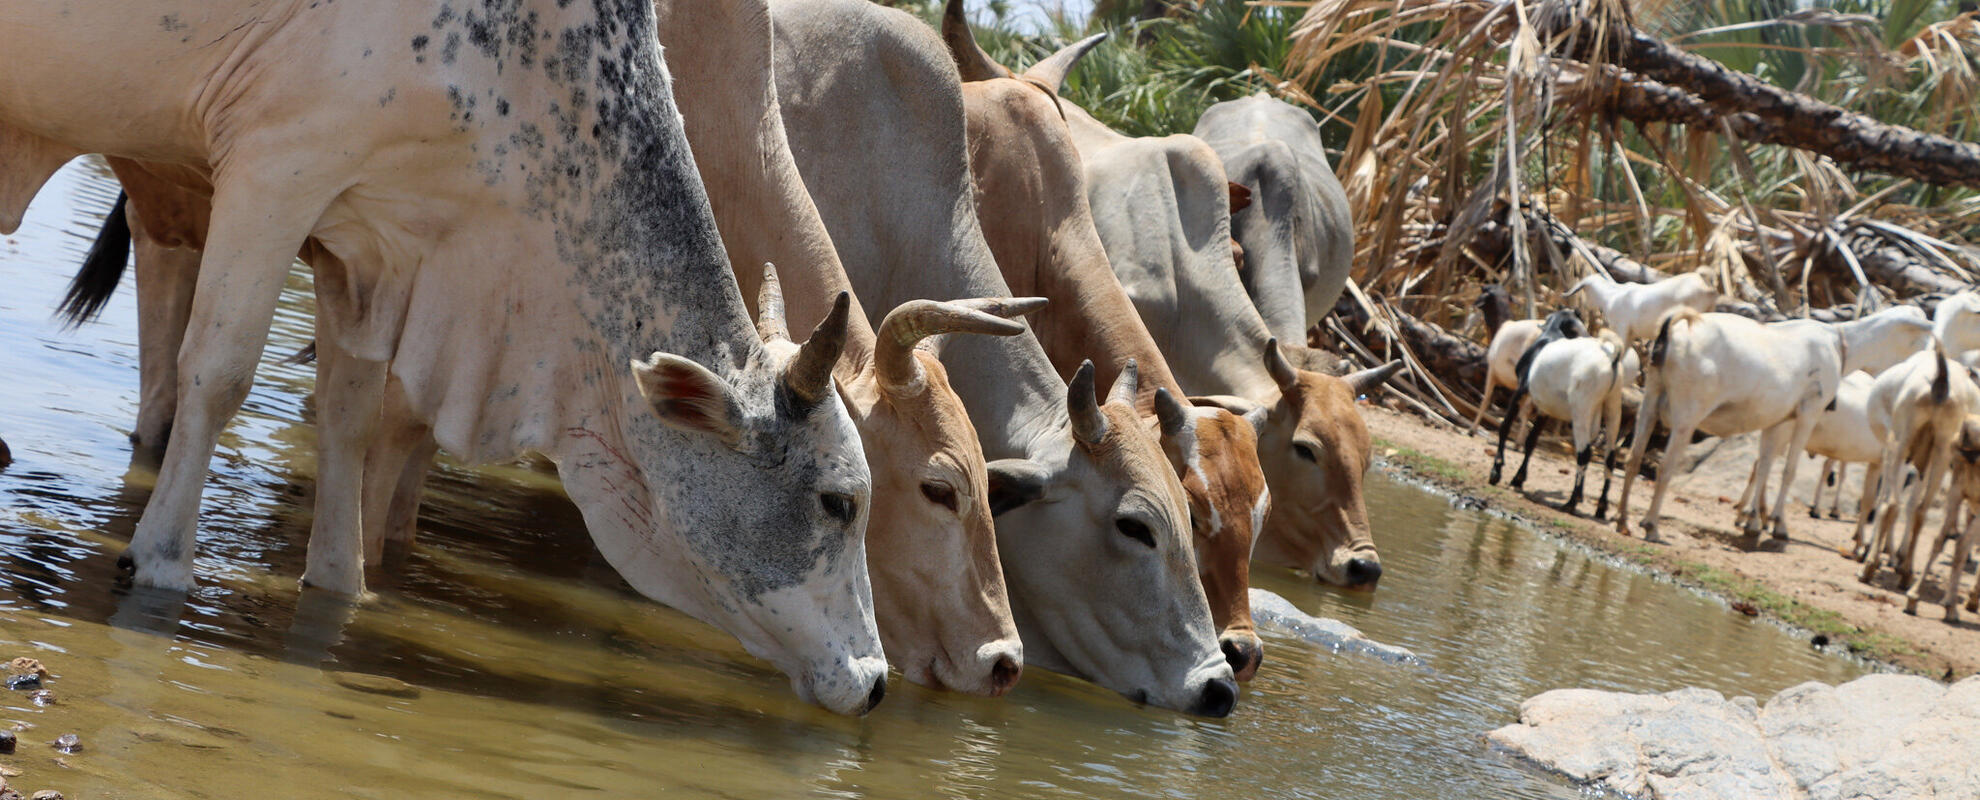 Cows drinking water in a drying river in Isiolo country, Kenya